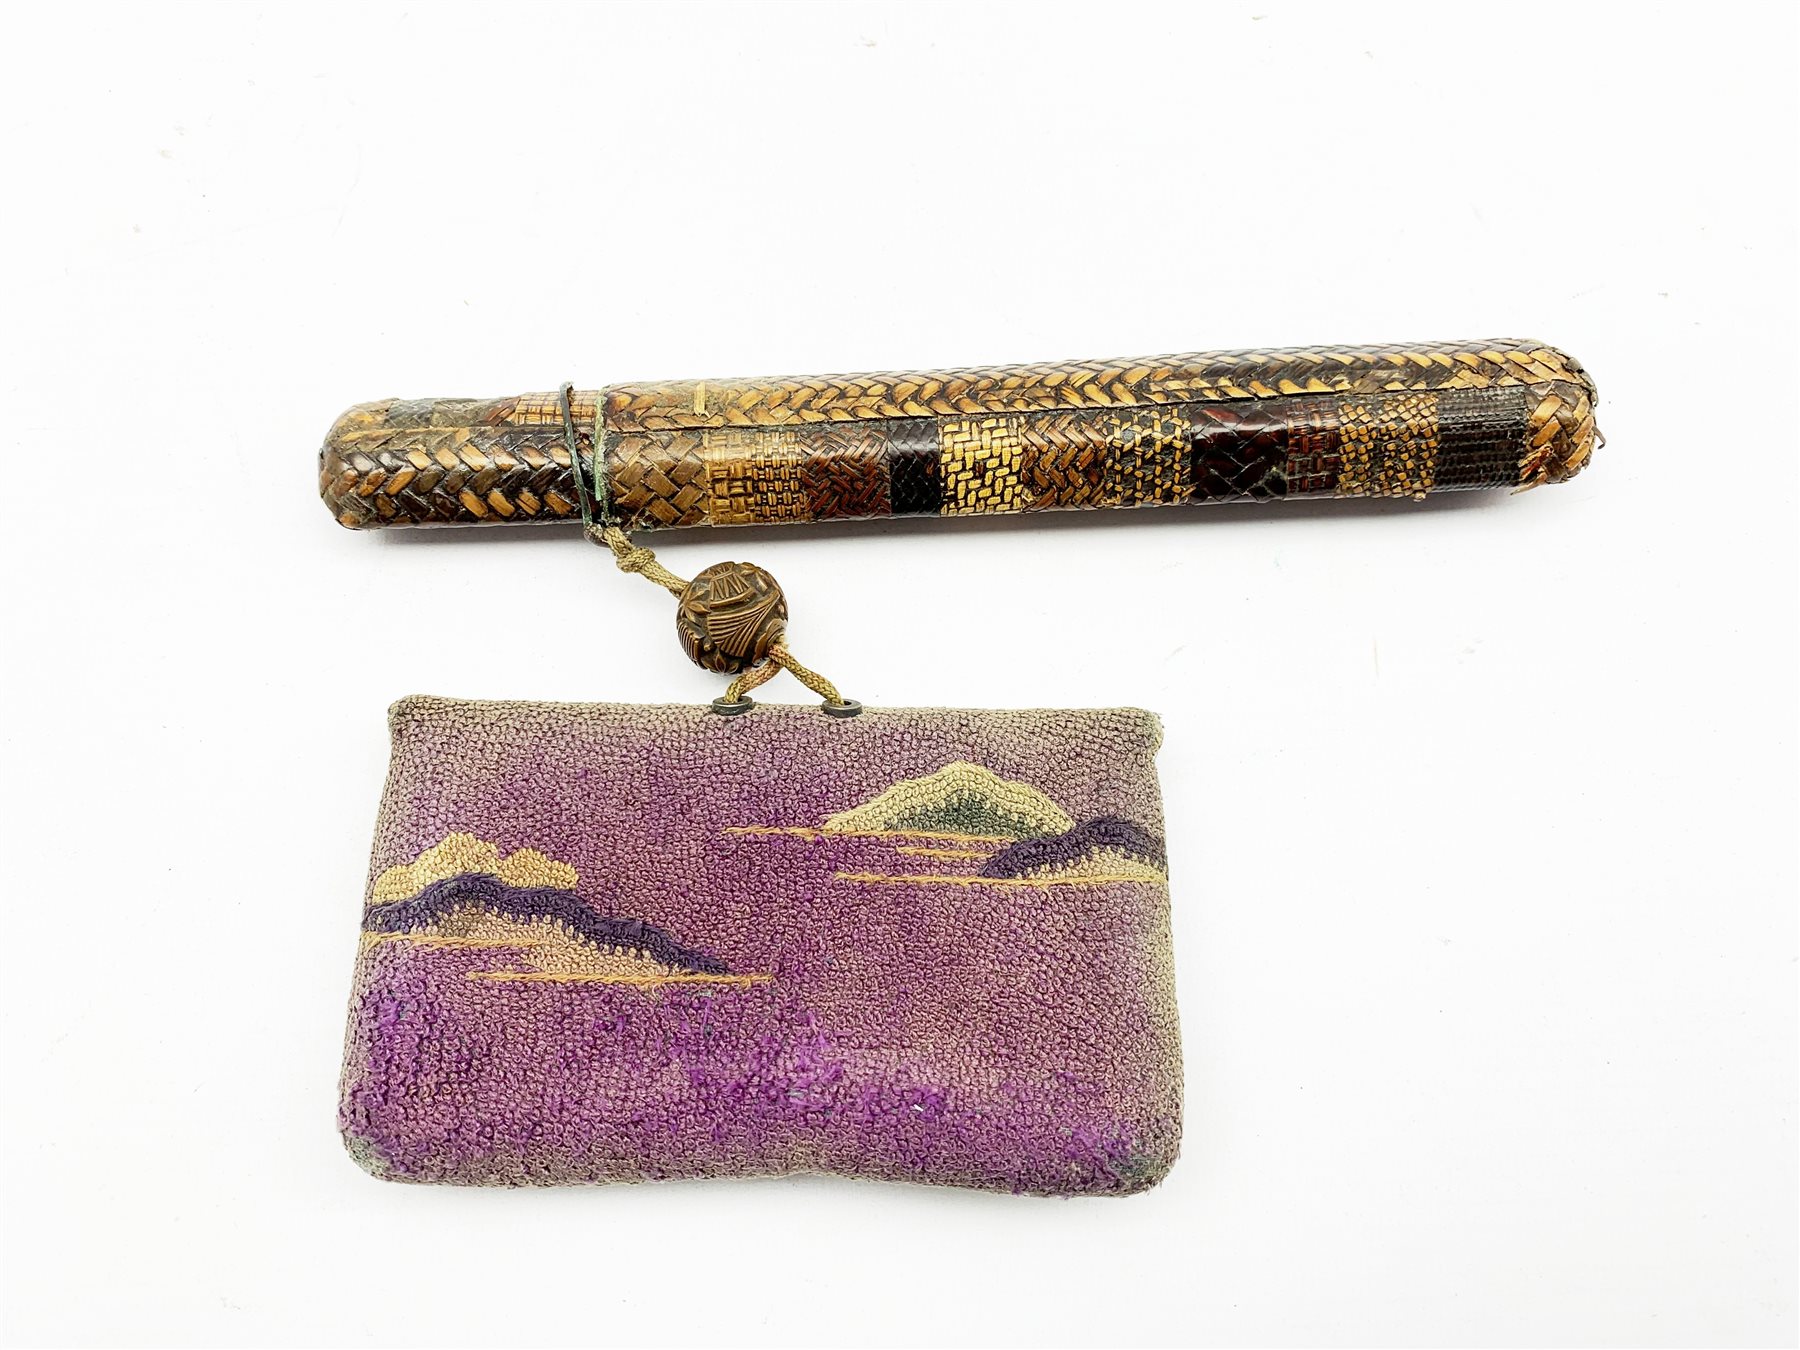 19th century Japanese embroidered tobacco pouch (tabako-ire) with bronze mae-kanagu in the form of f - Image 2 of 7